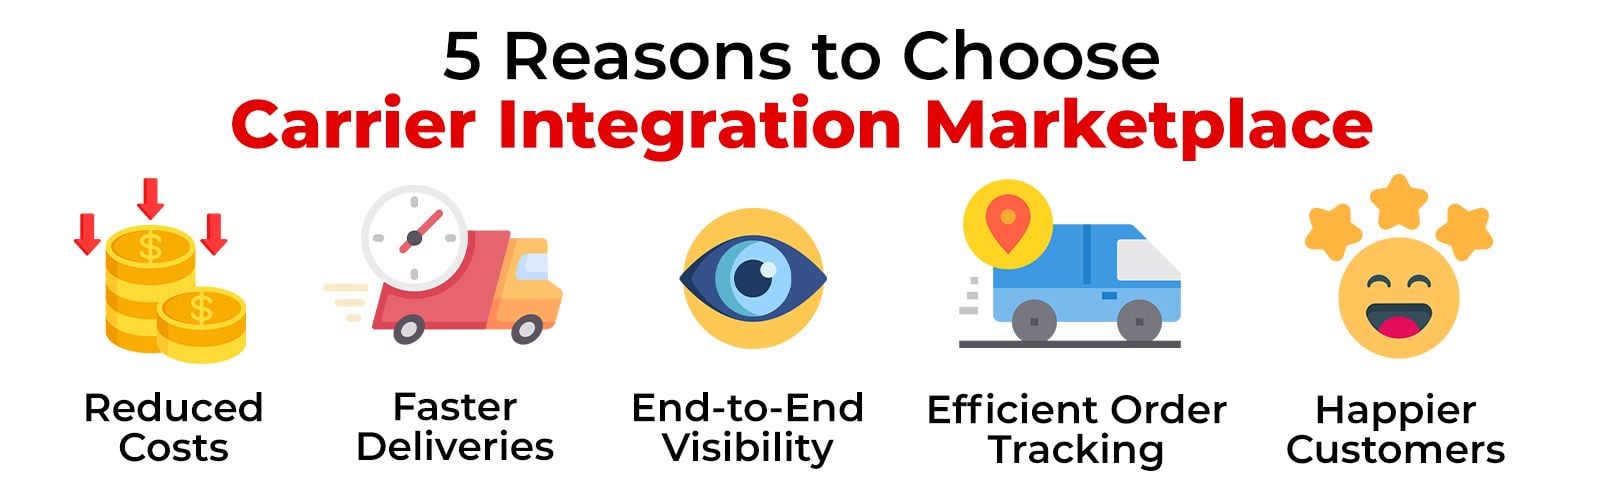 5 Reasons to choose Carrier Integartion Marketplace